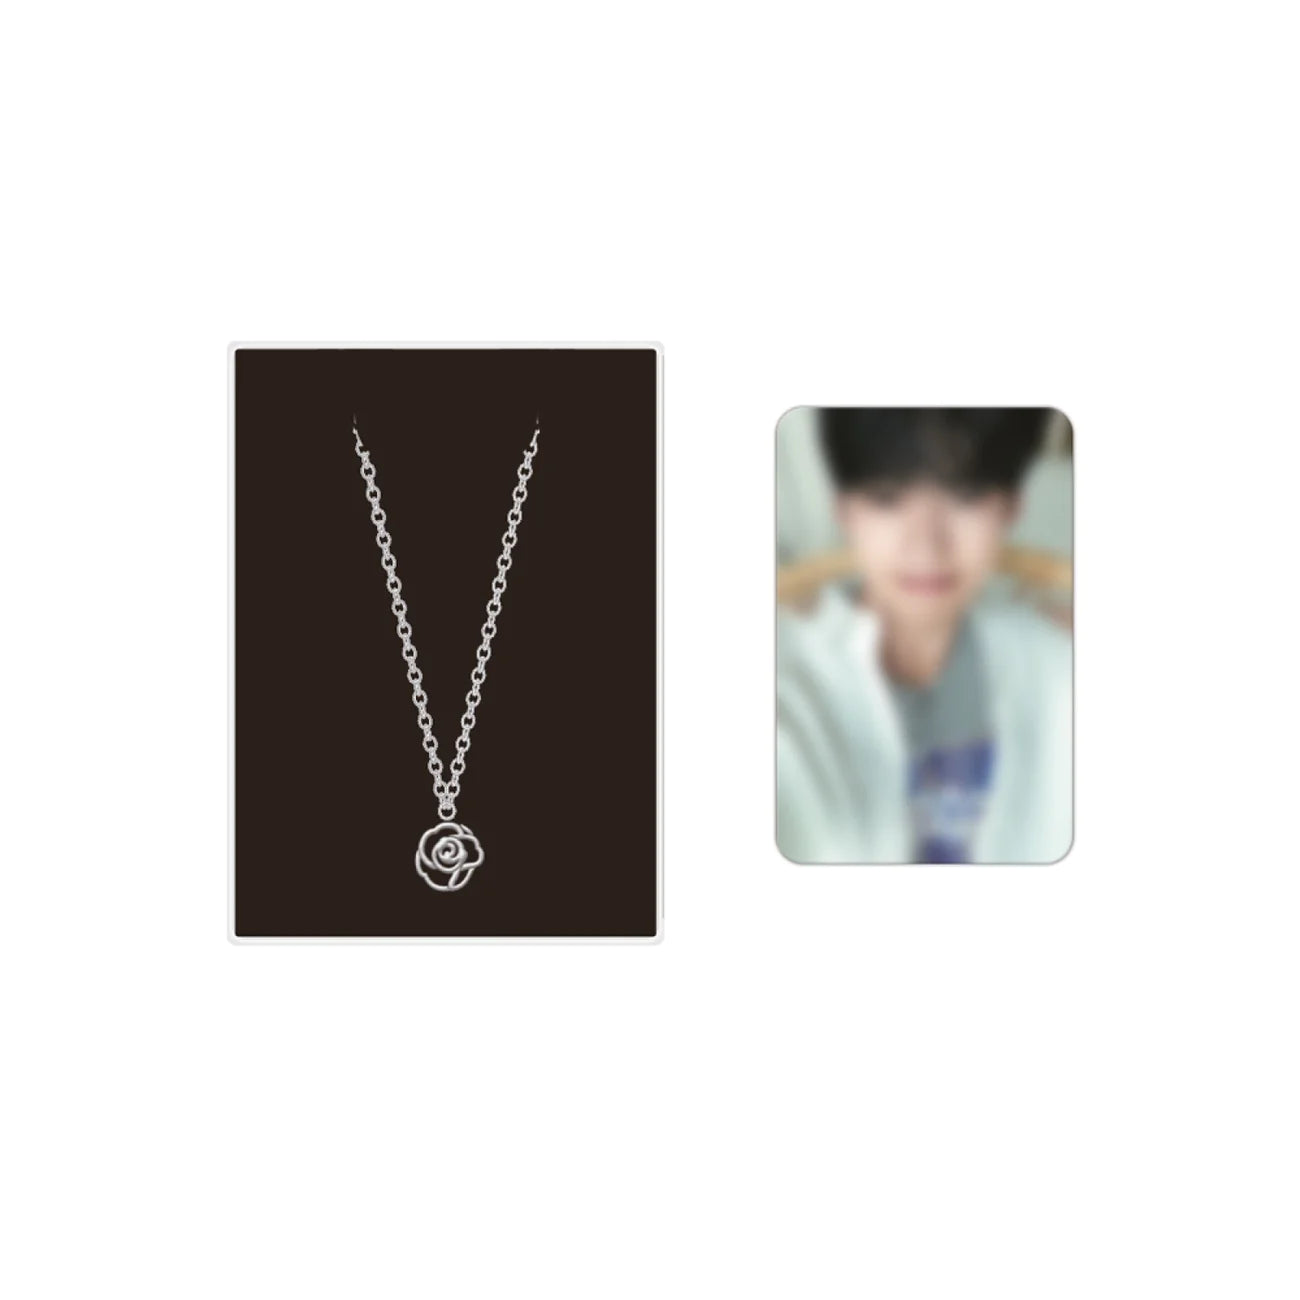 ZEROBASEONE - 2023 Fancon Official Necklace